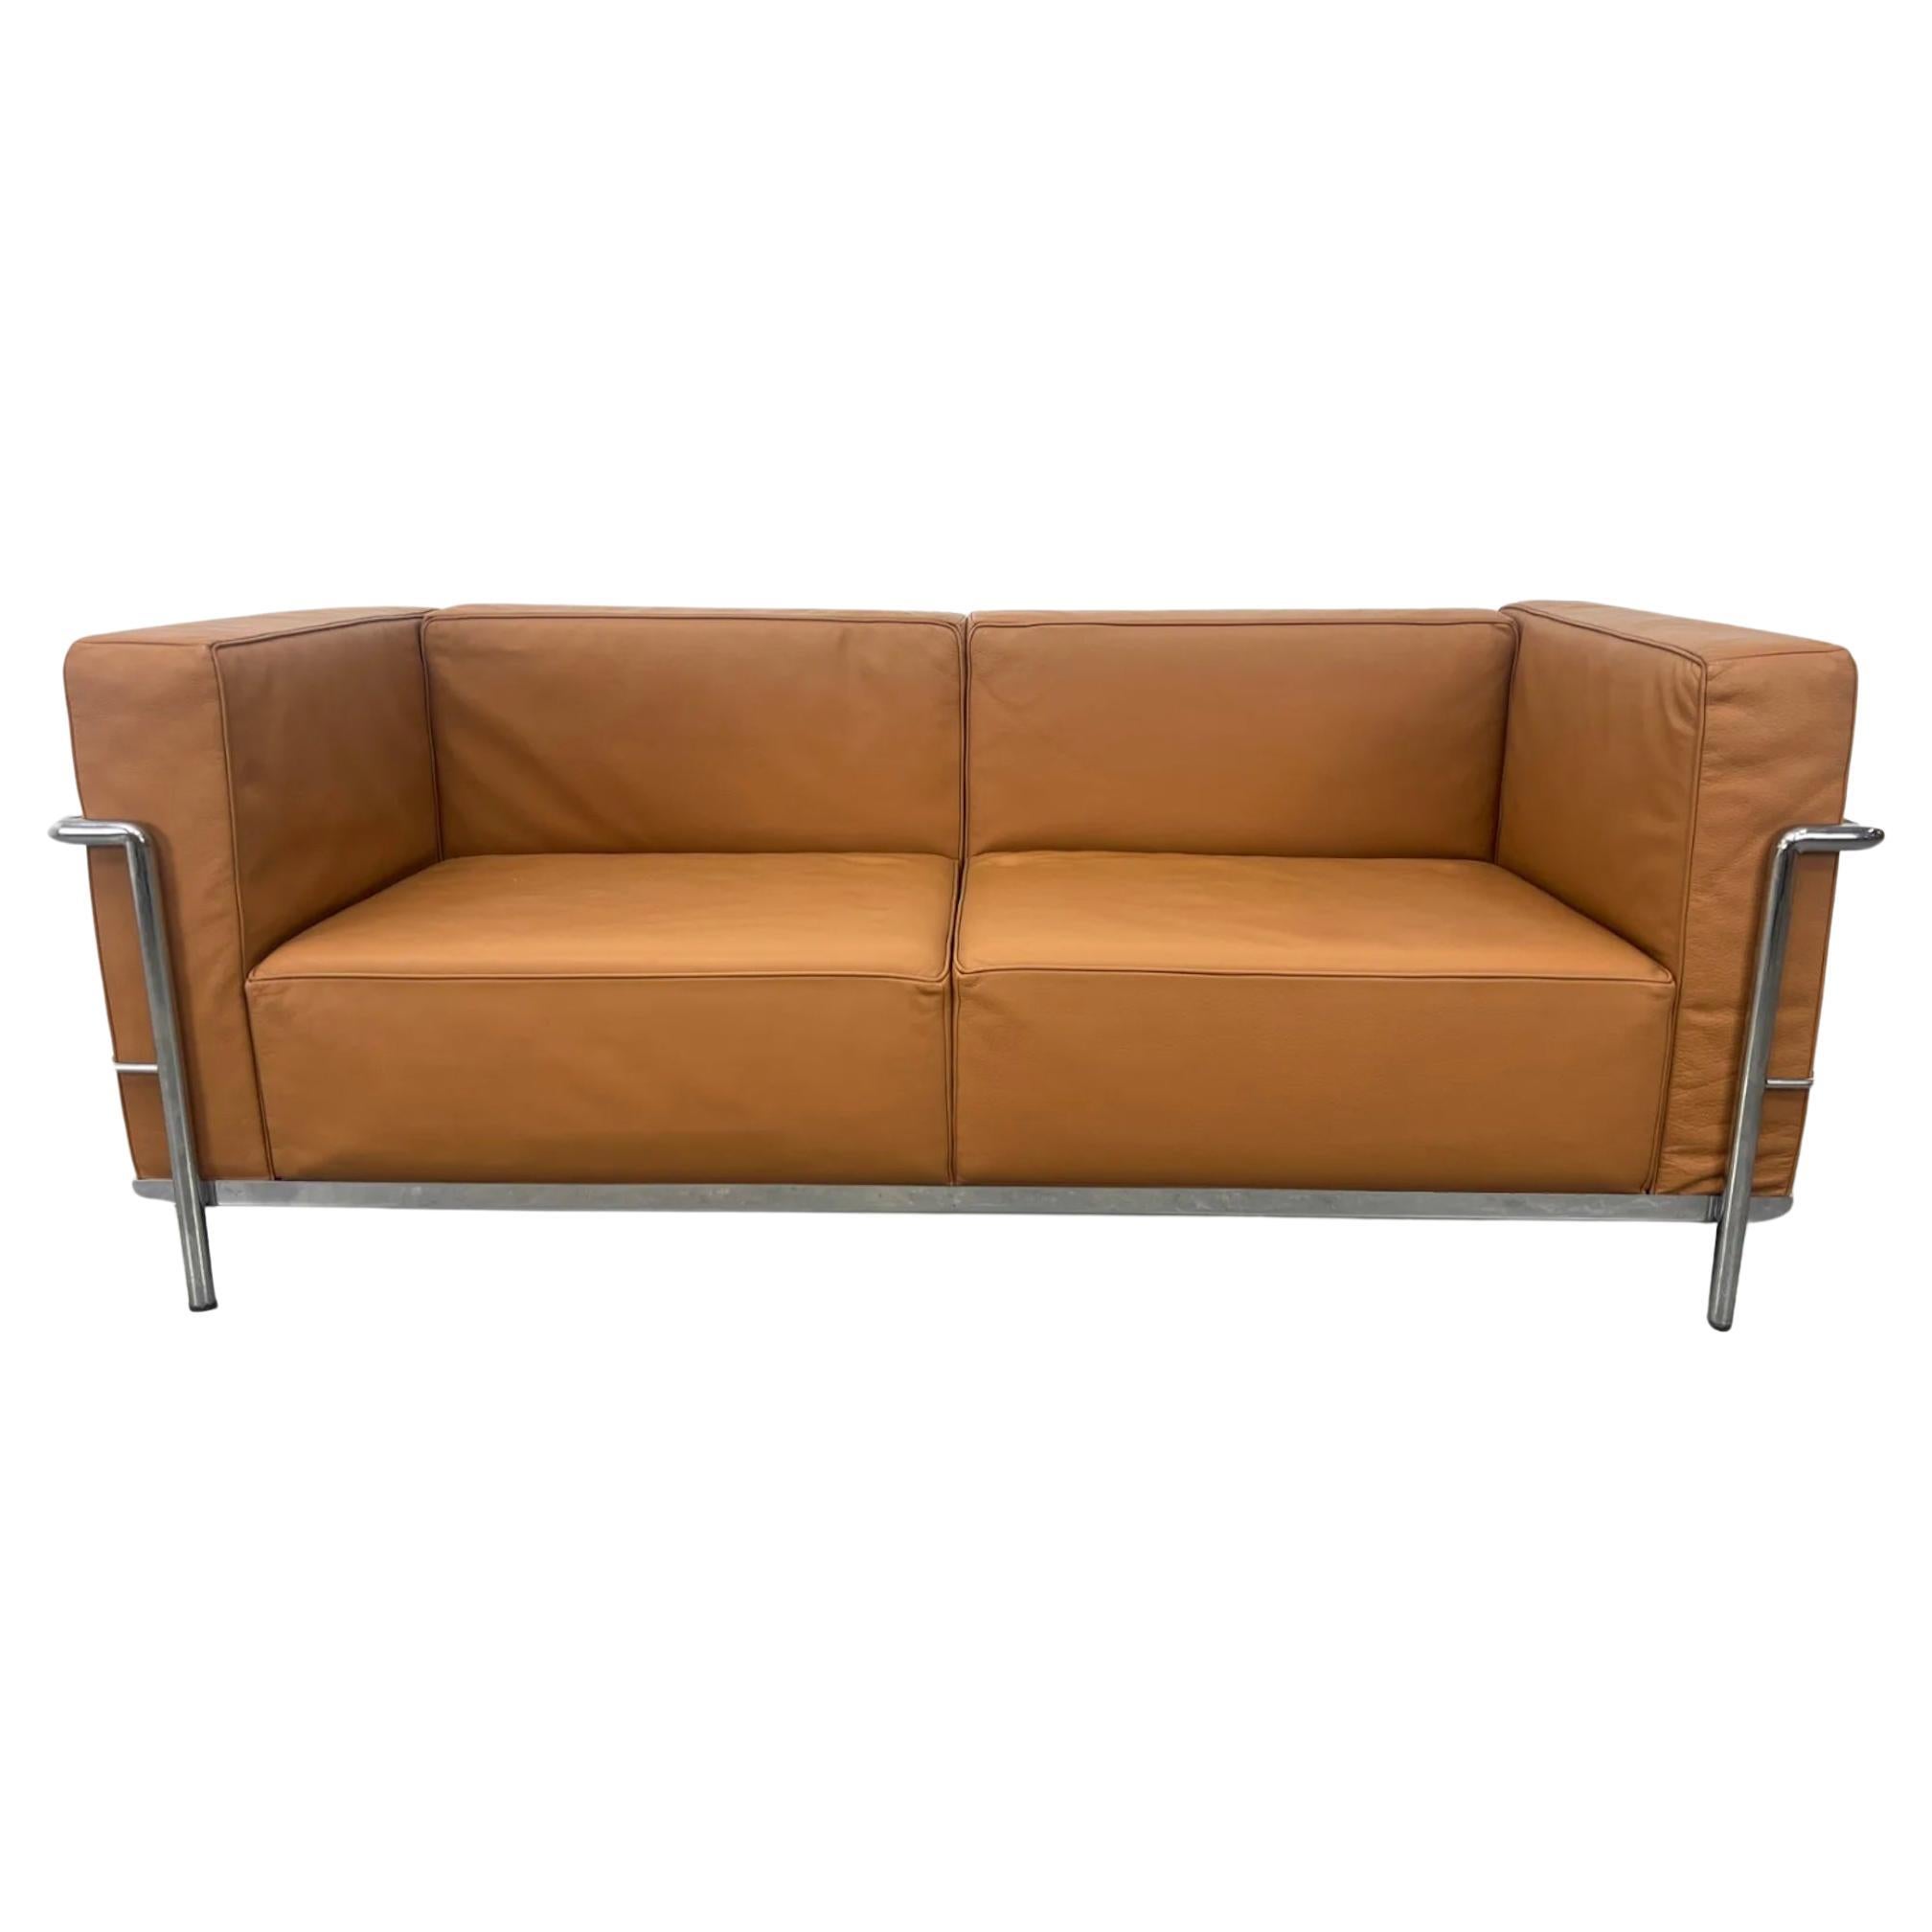 Vintage LC2 Tan leather chrome frame 2 seat sofa loveseat by Le Corbusier